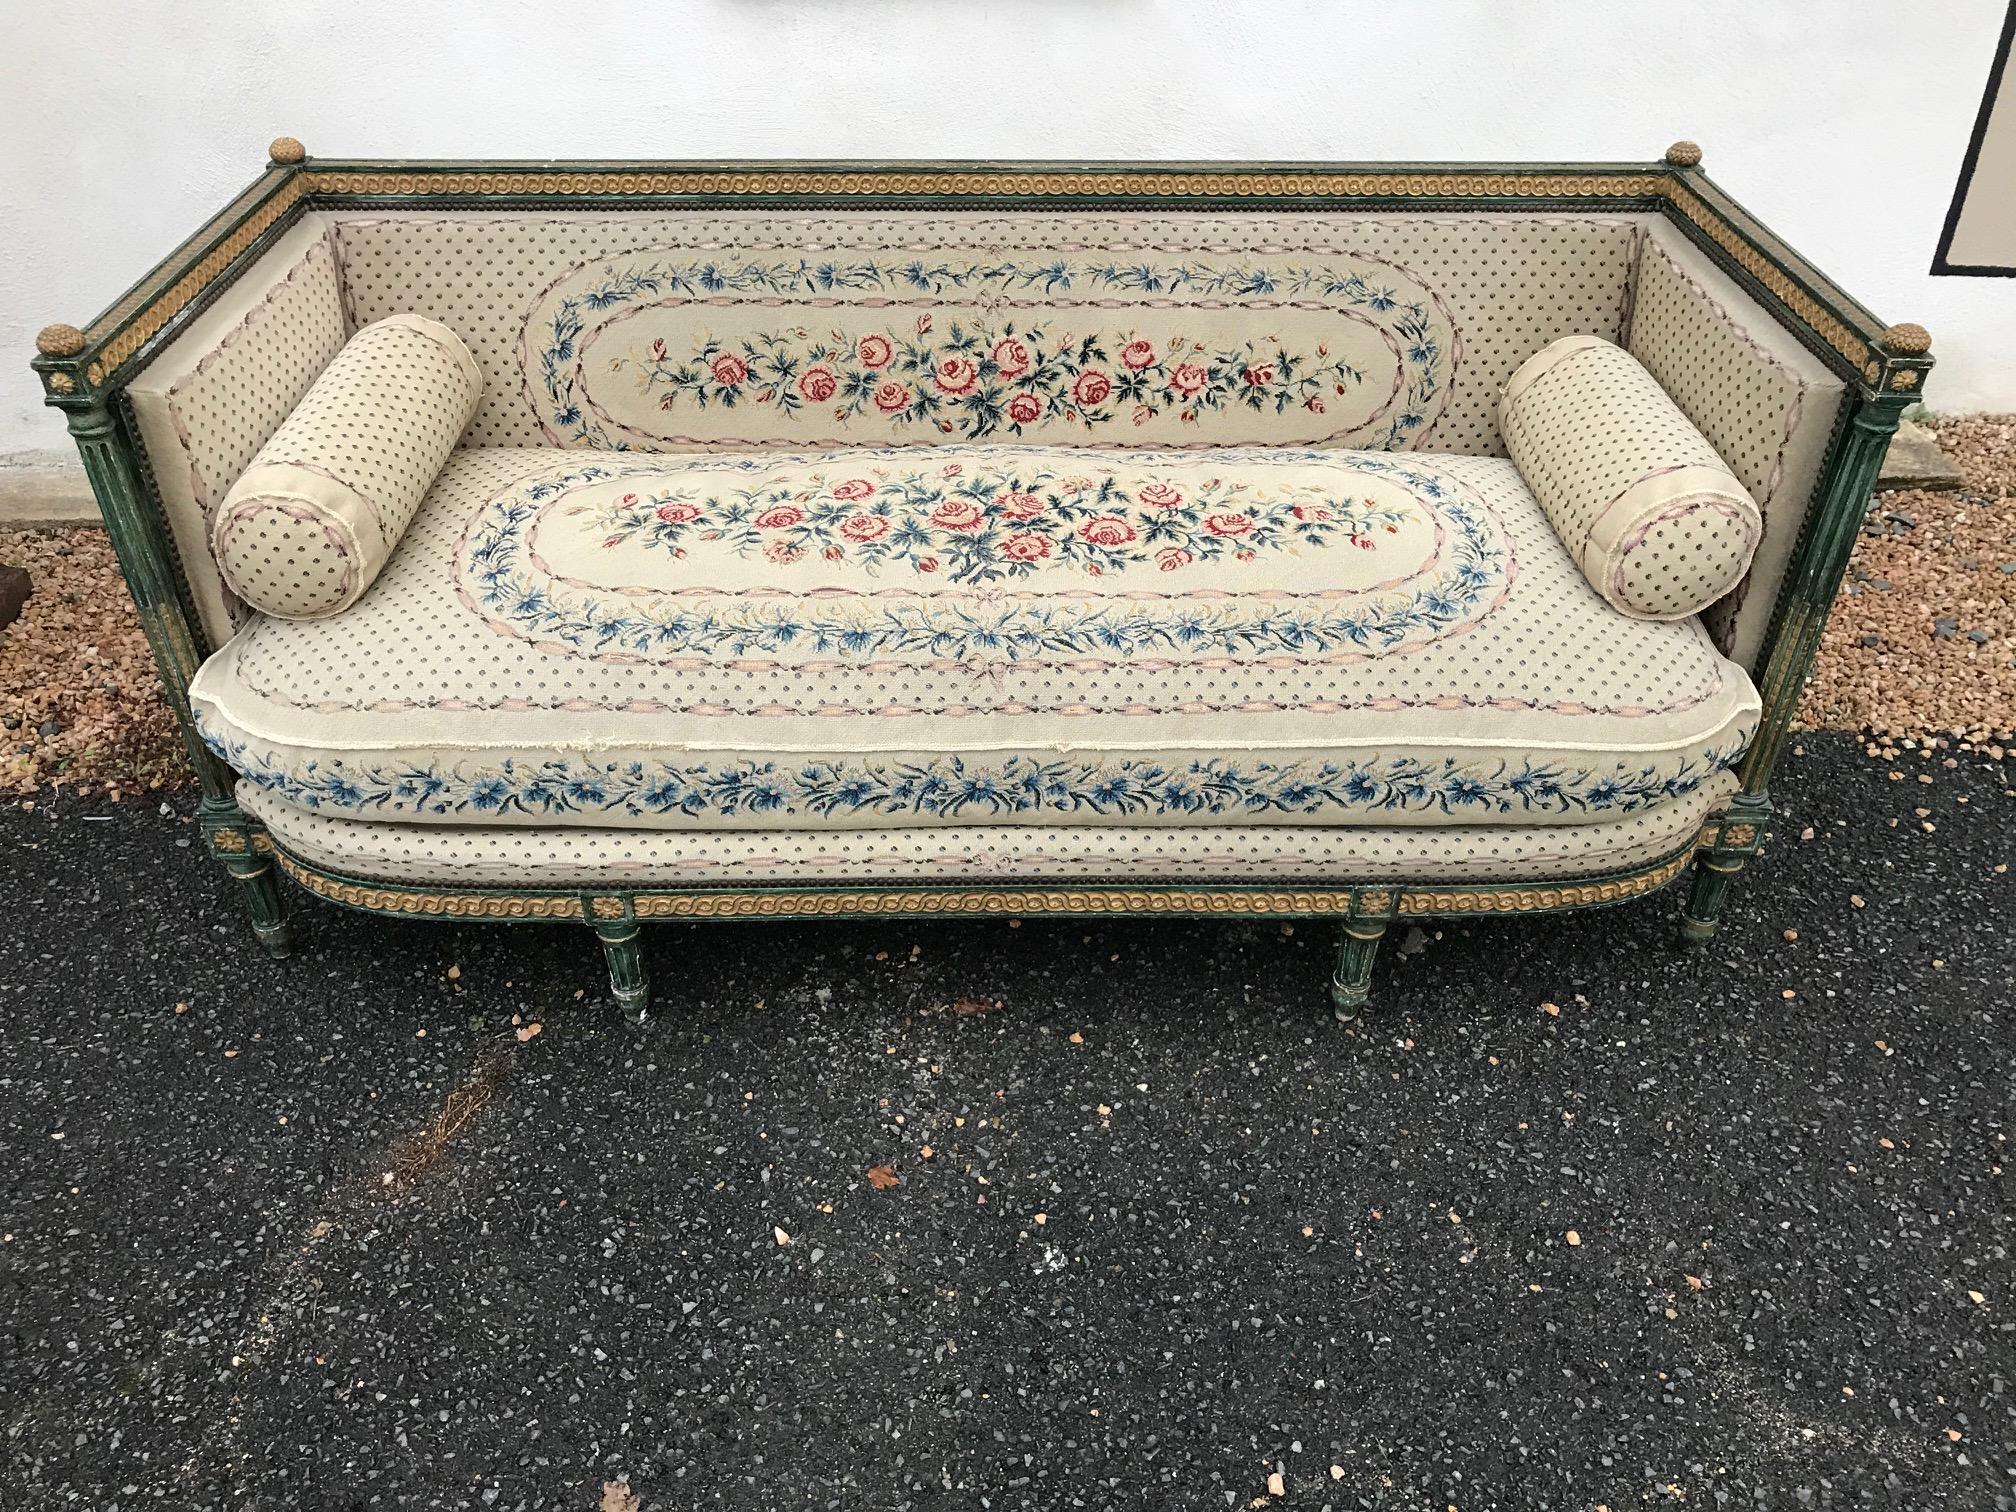 Beautiful 20th century French Louis XVI style canapé.
Large cushion on the seating but little bit damage, needs to be reupholstered.
This fabric is beautiful. Very nice green and gold patina on the wood.
Exceptional and rare piece.